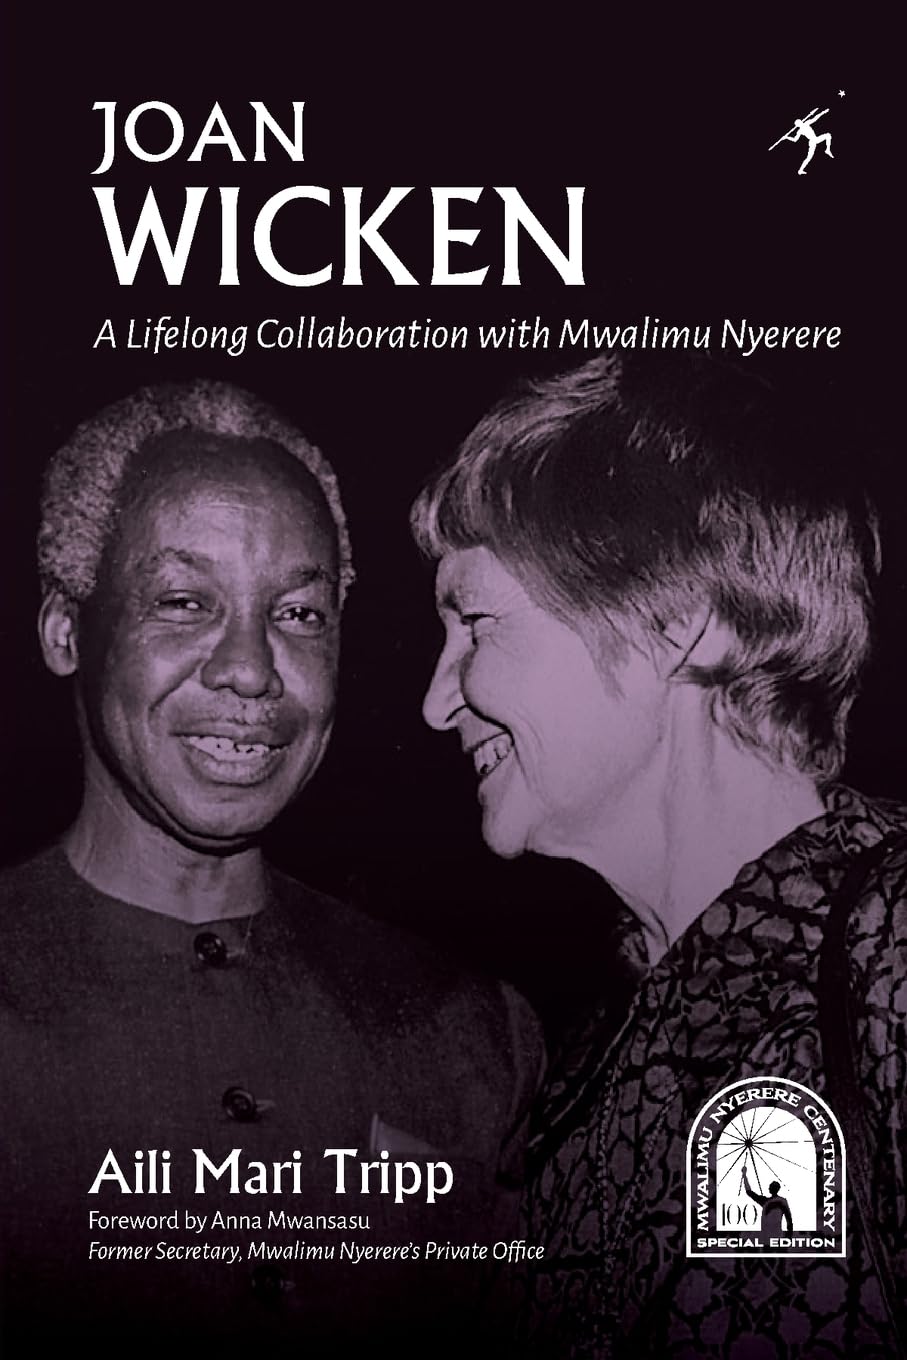 Joan Wicken and Her Lifelong Collaboration with Mwalimu Nyerere by Aili Mari Tripp